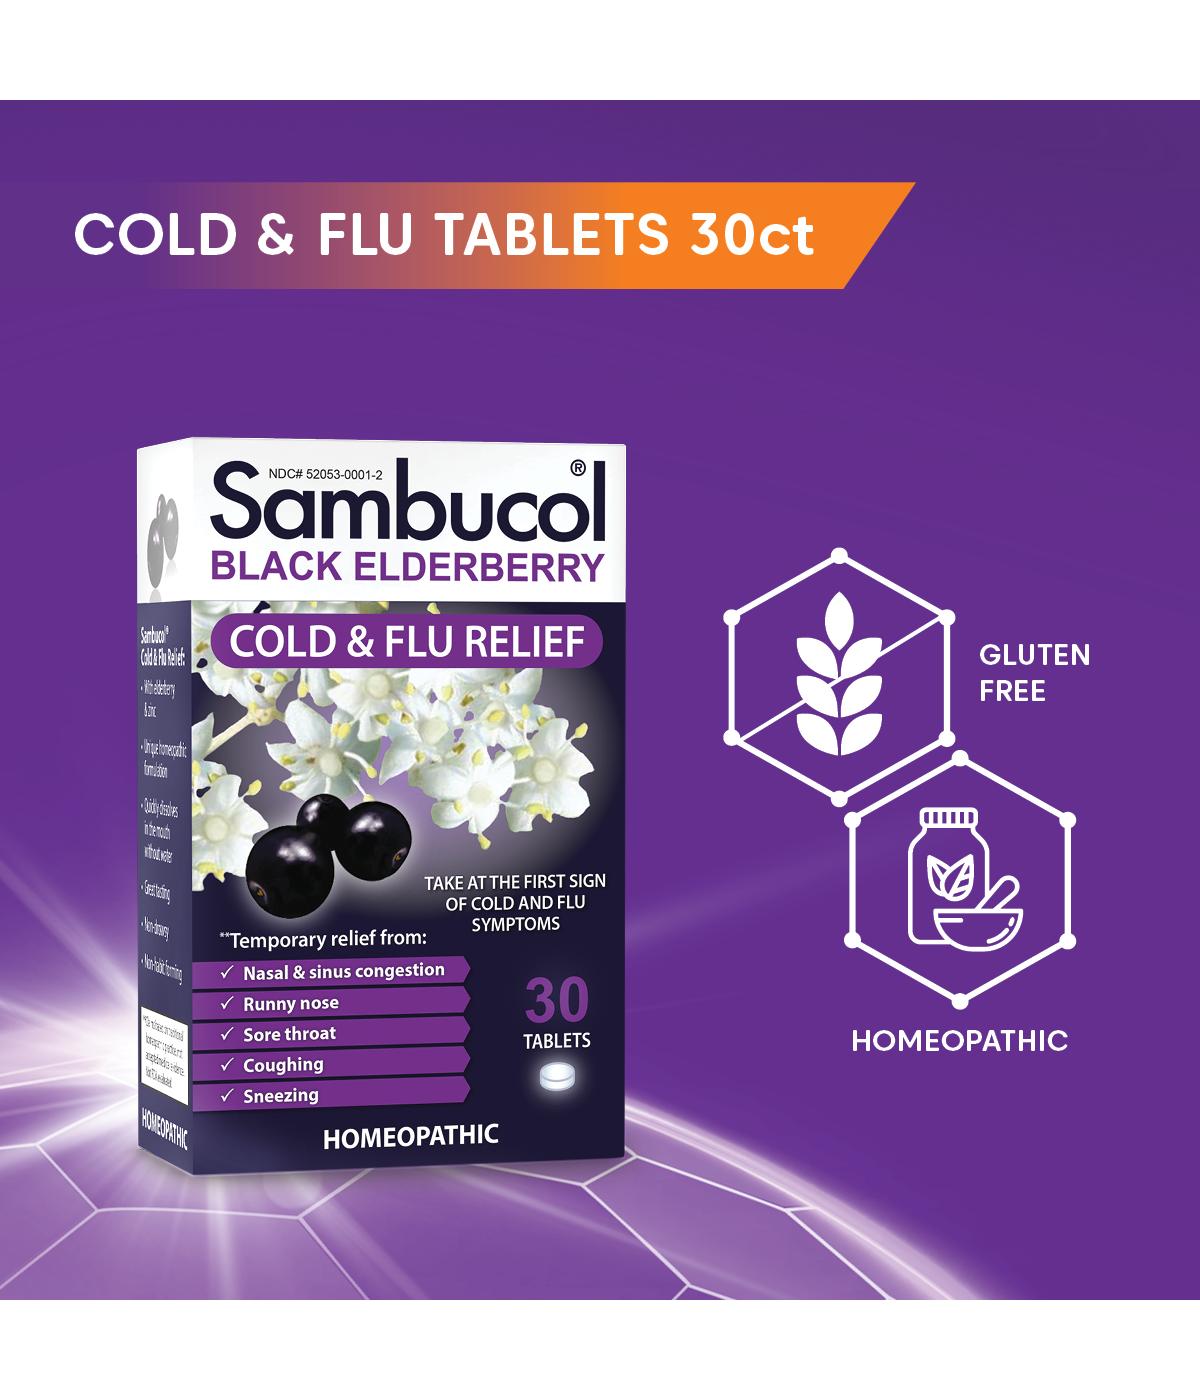 Sambucol Homeopathic Cold & Flu Relief Tablets; image 4 of 9